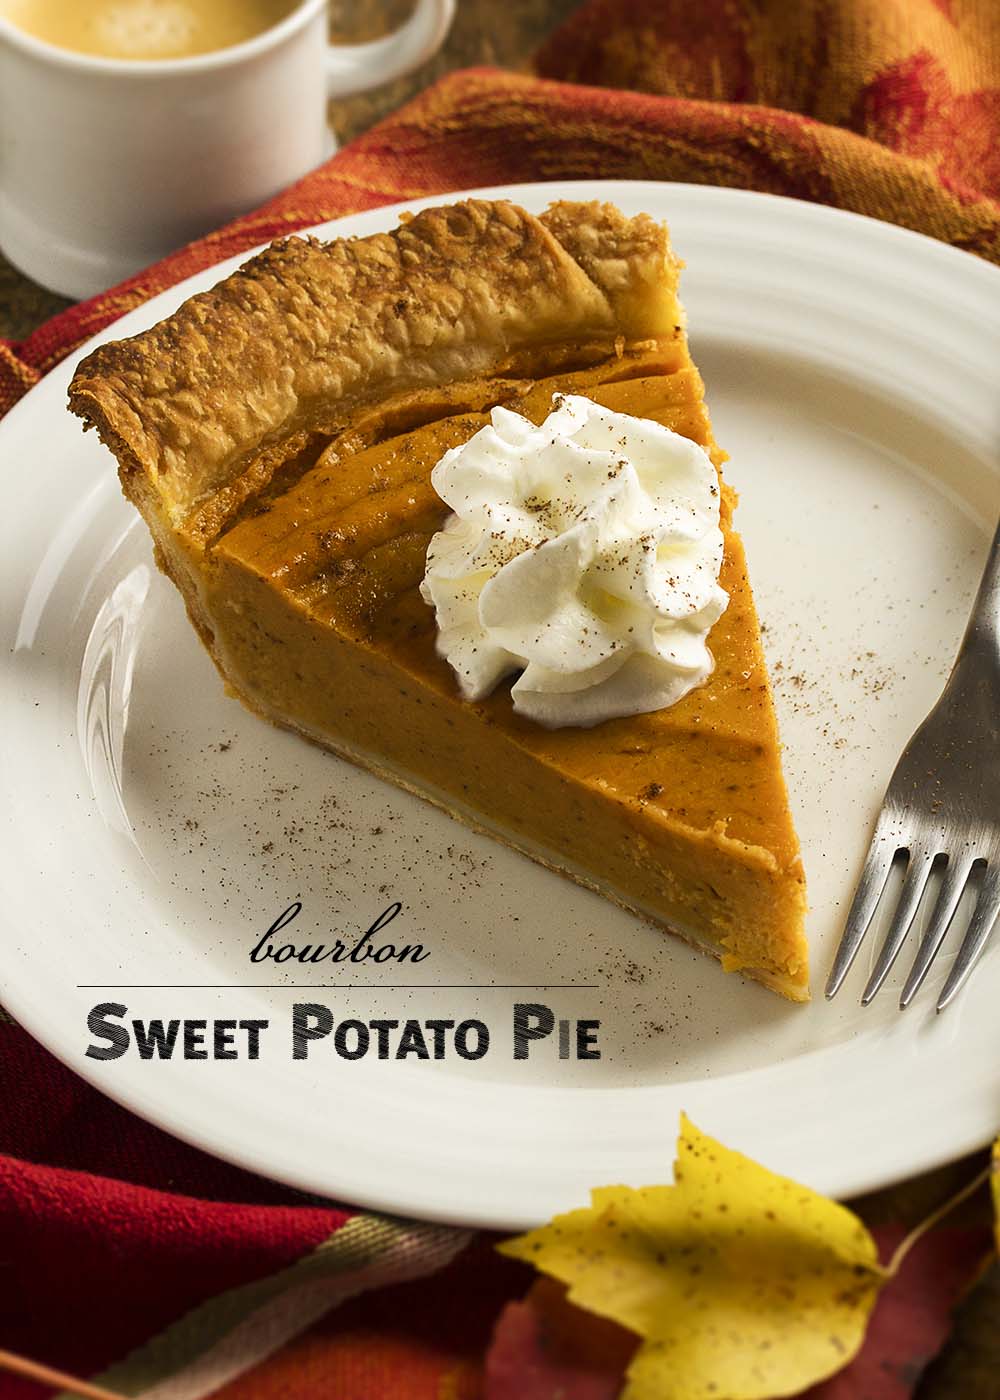 Baked sweet potatoes, cream, spices, and a dollop of bourbon come together to make a classic bourbon sweet potato pie which is perfect for the Thanksgiving table. | justalittlebitofbacon.com